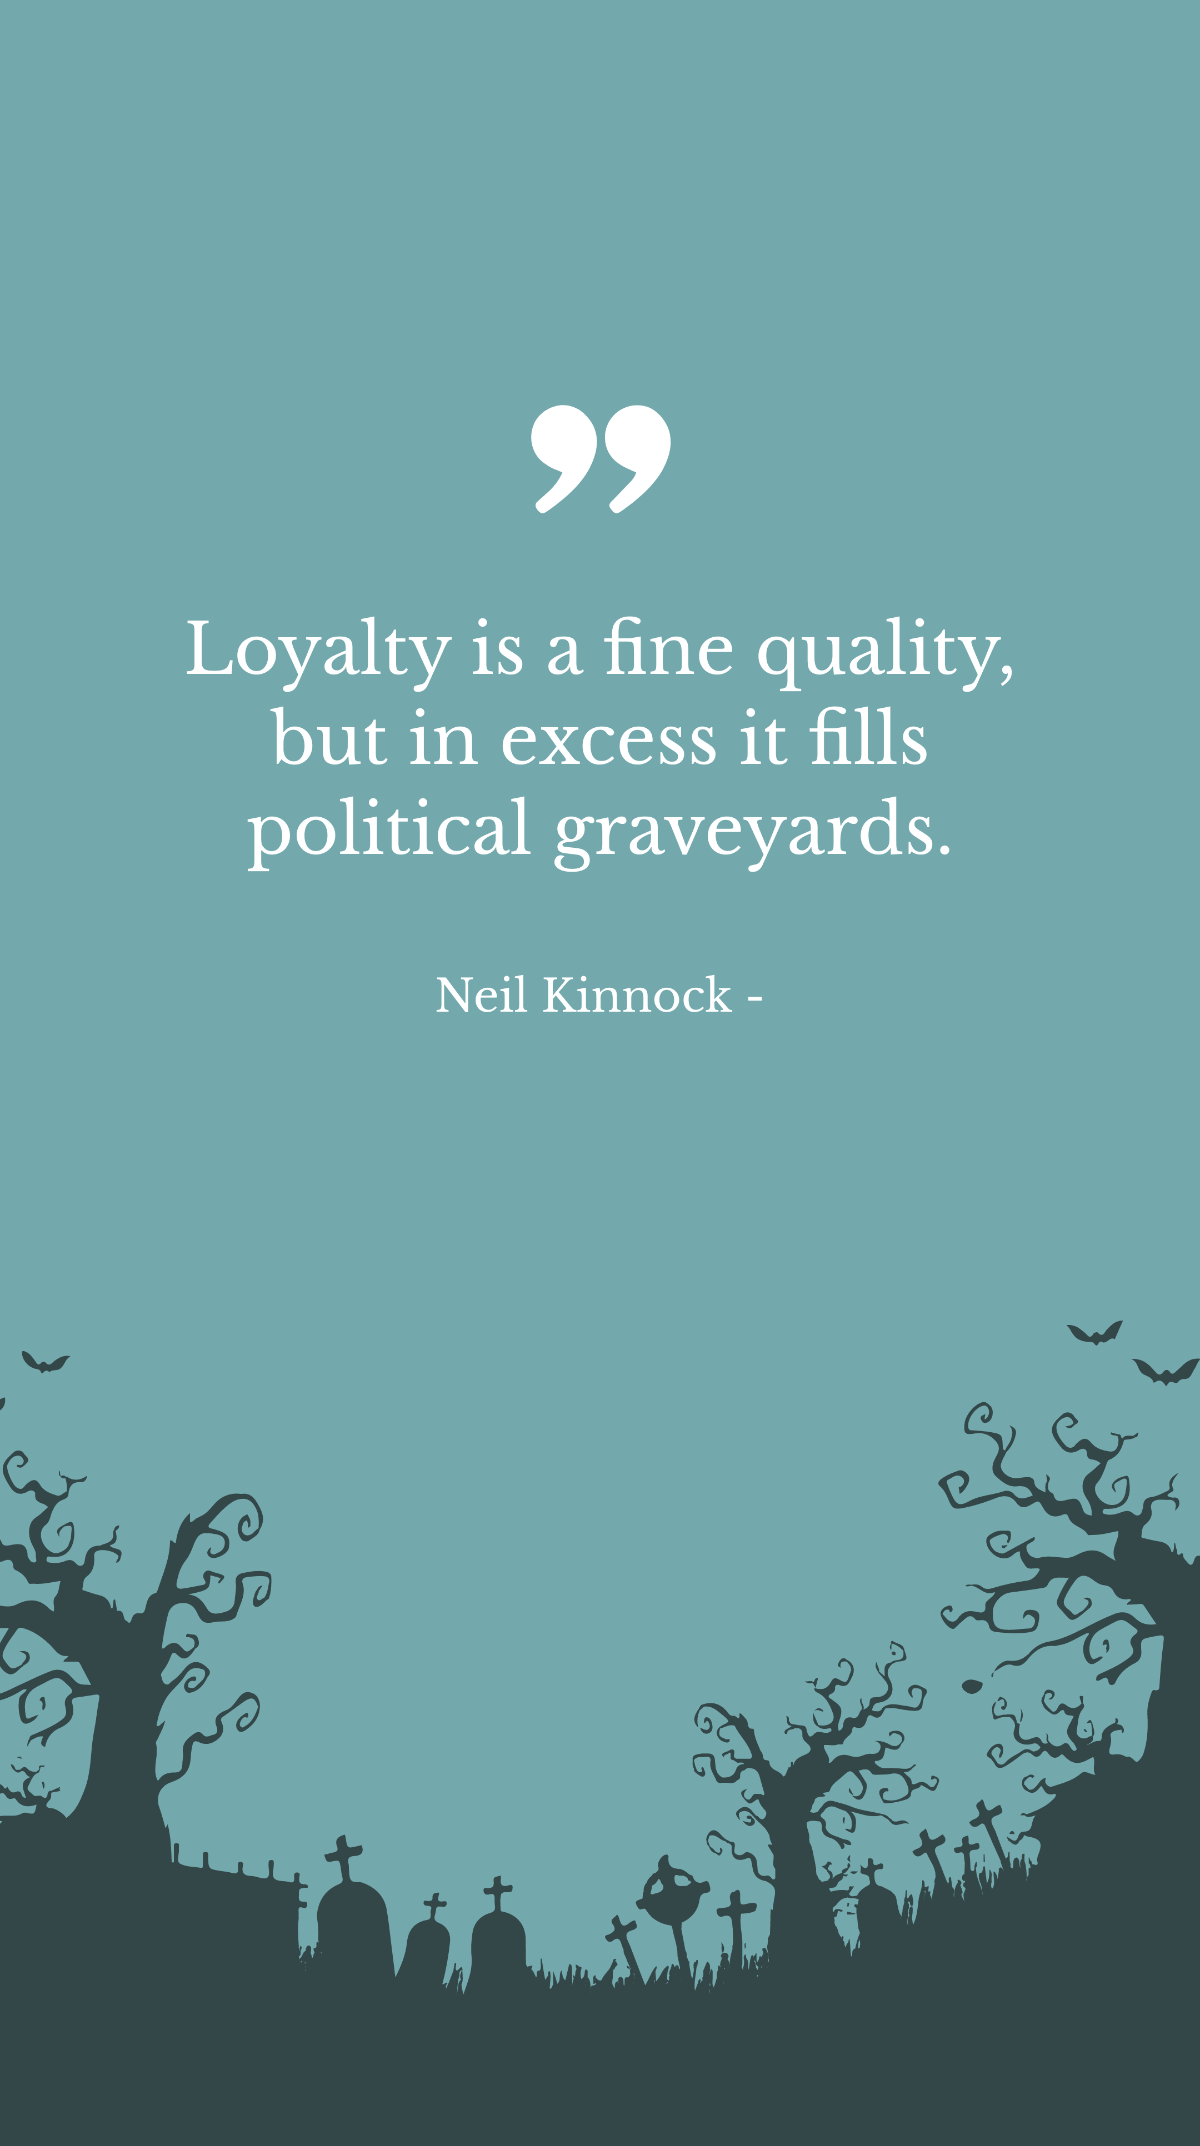 Neil Kinnock - Loyalty is a fine quality, but in excess it fills political graveyards.